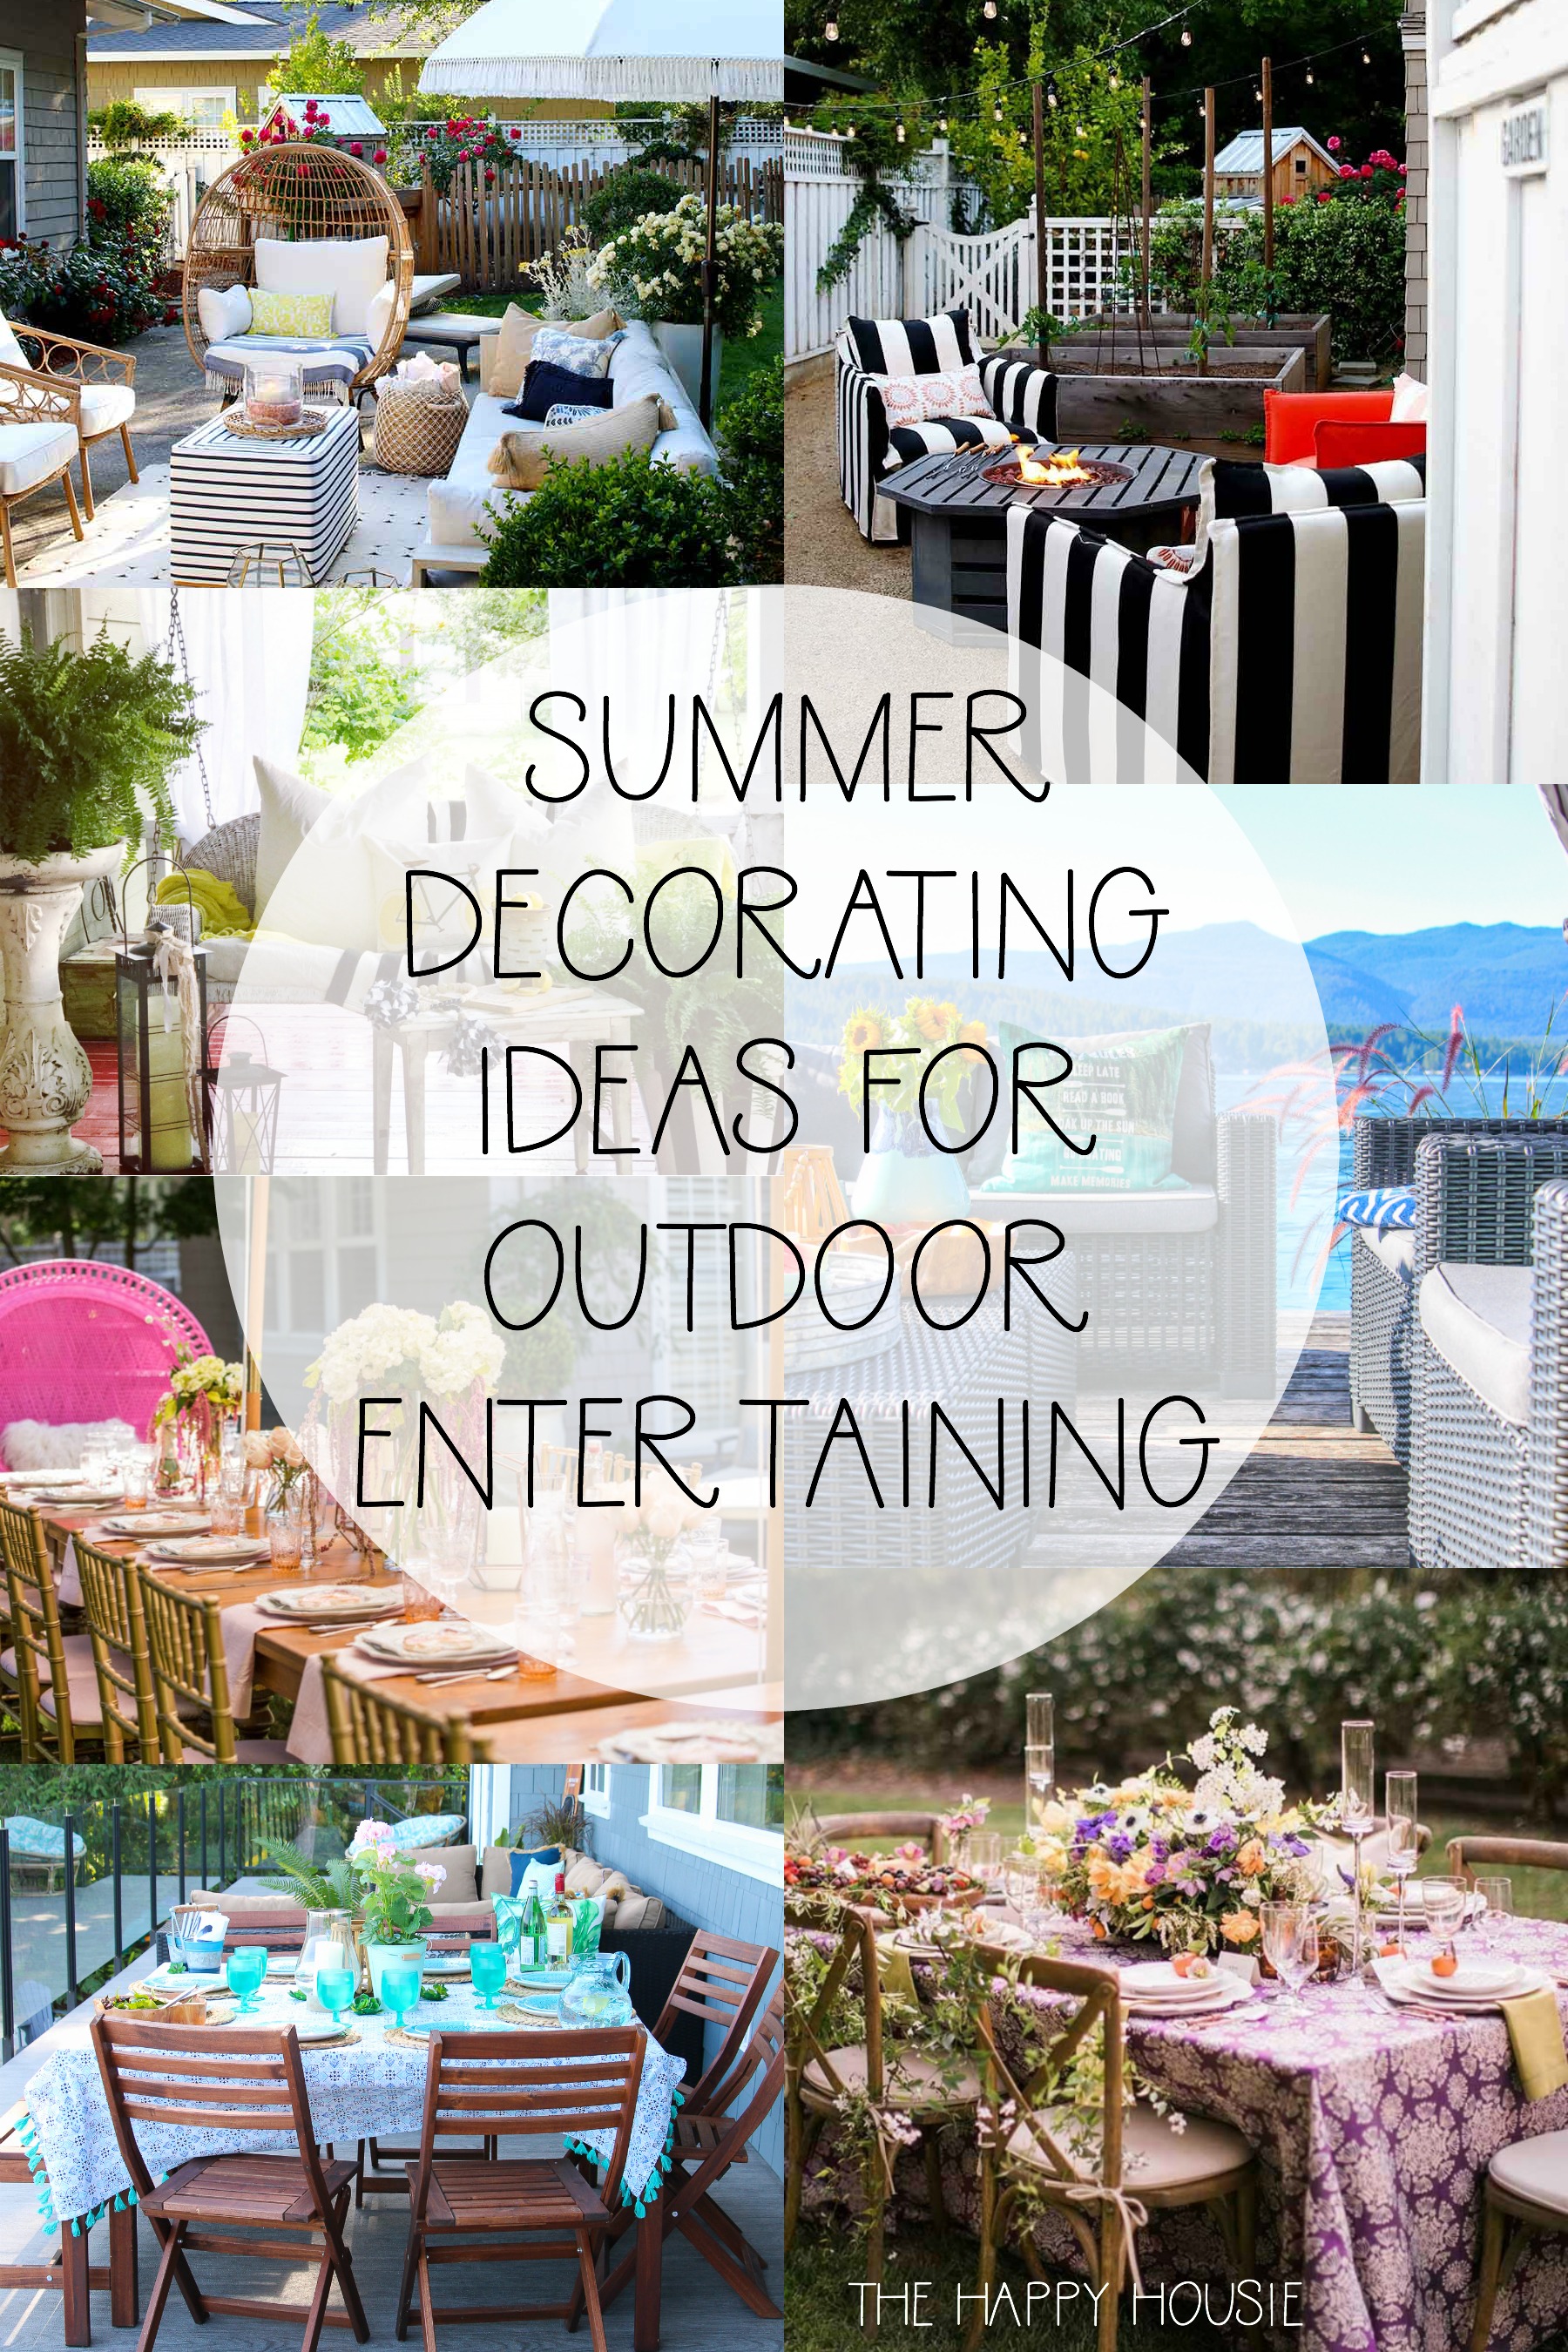 Summer Decorating Ideas for Outdoor Entertaining | The ...